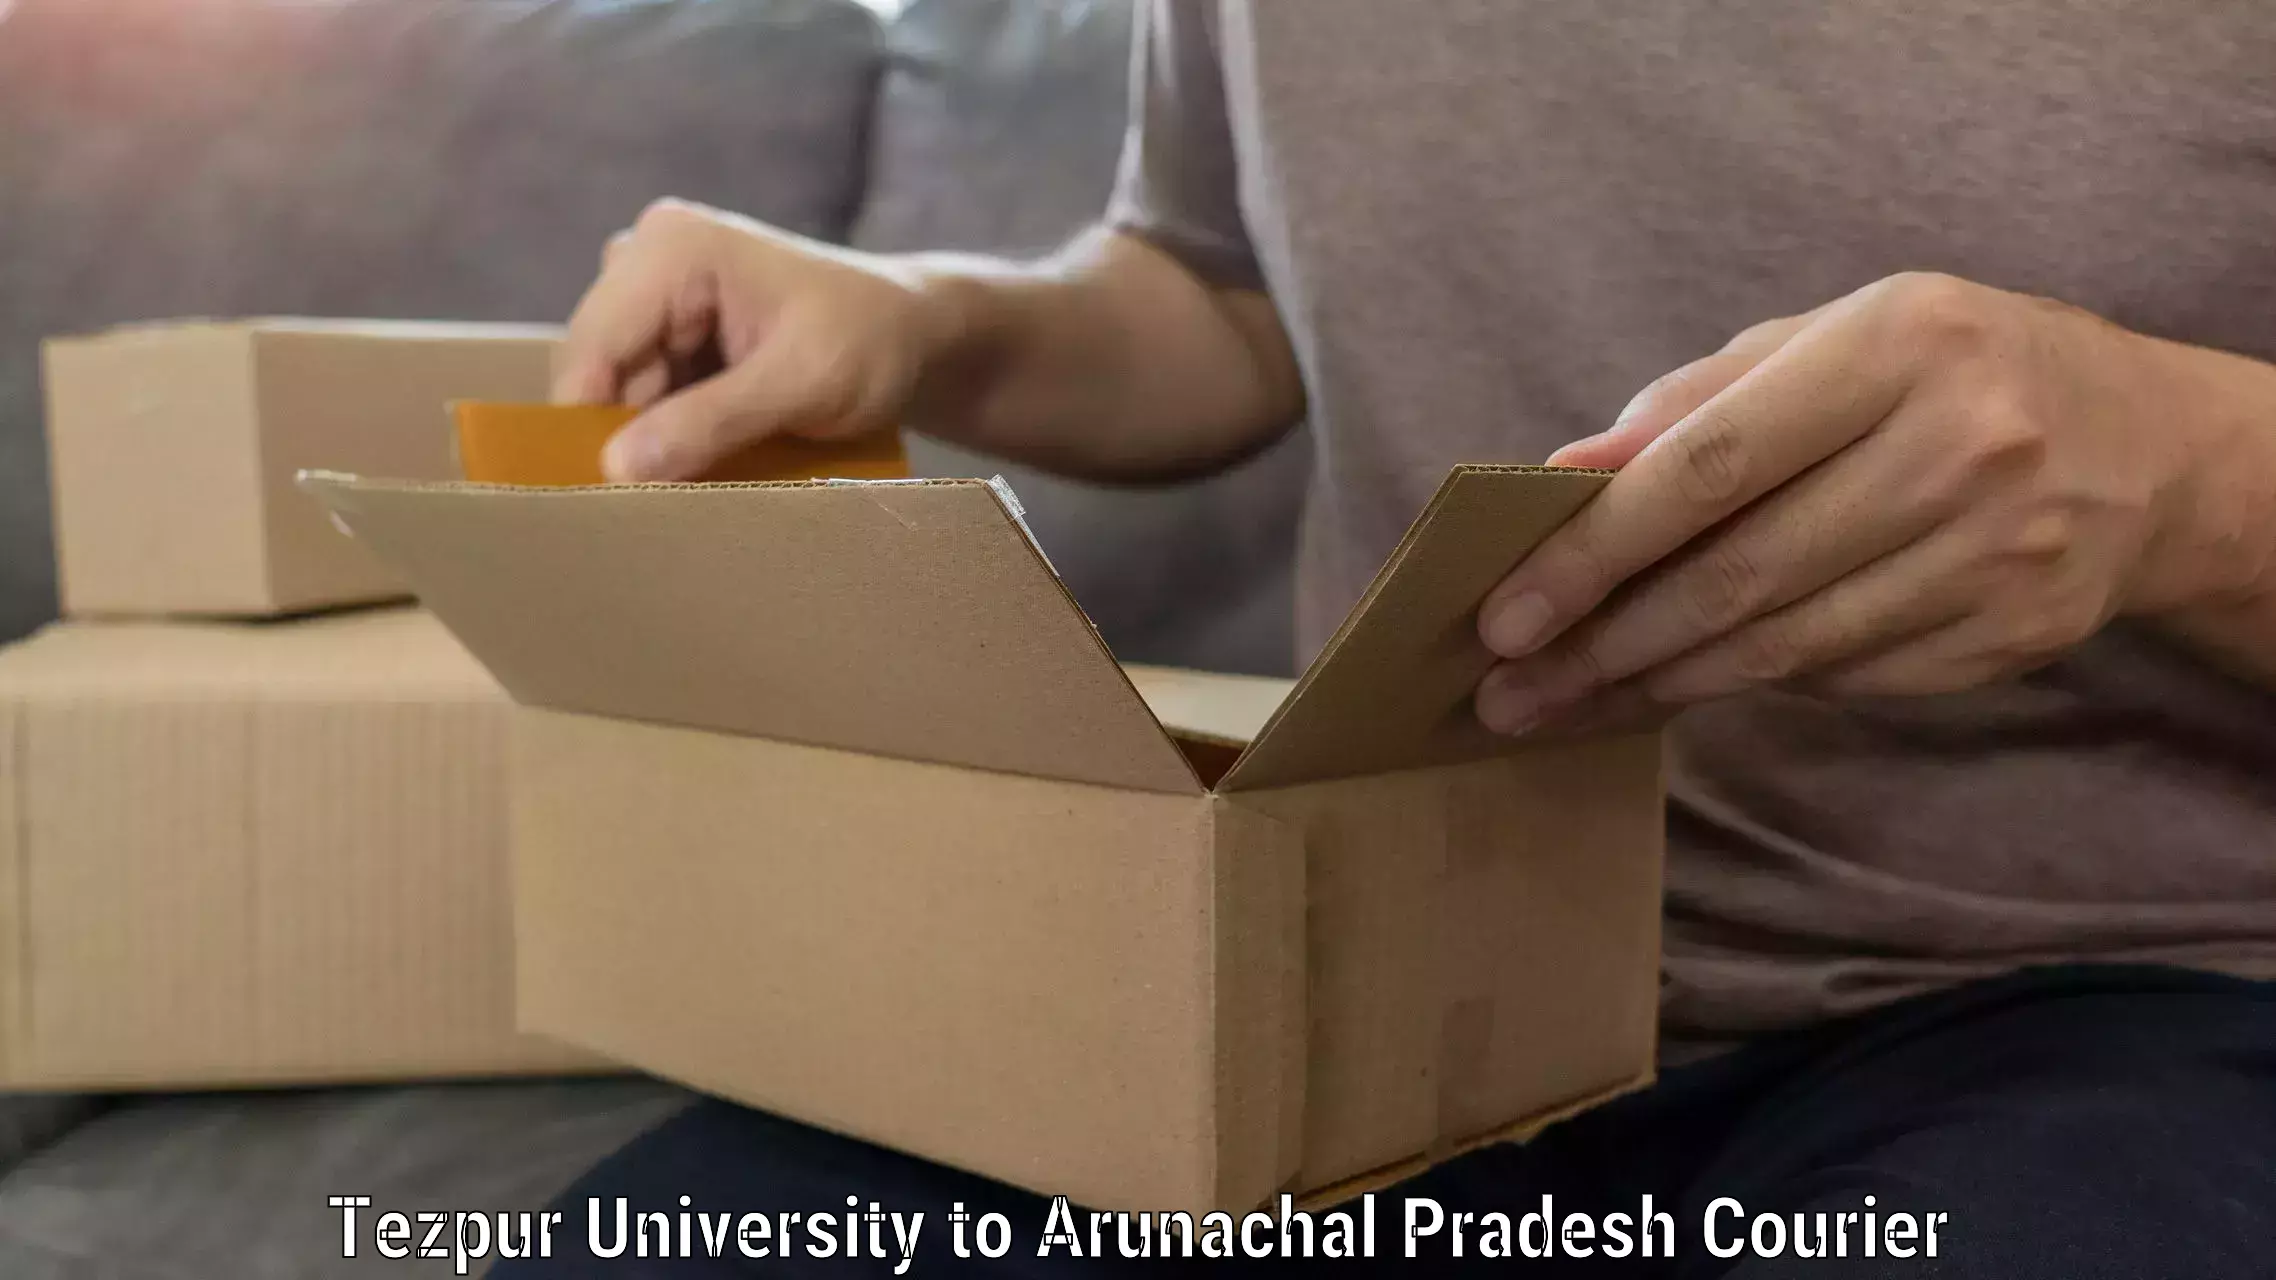 Household goods movers Tezpur University to Yingkiong